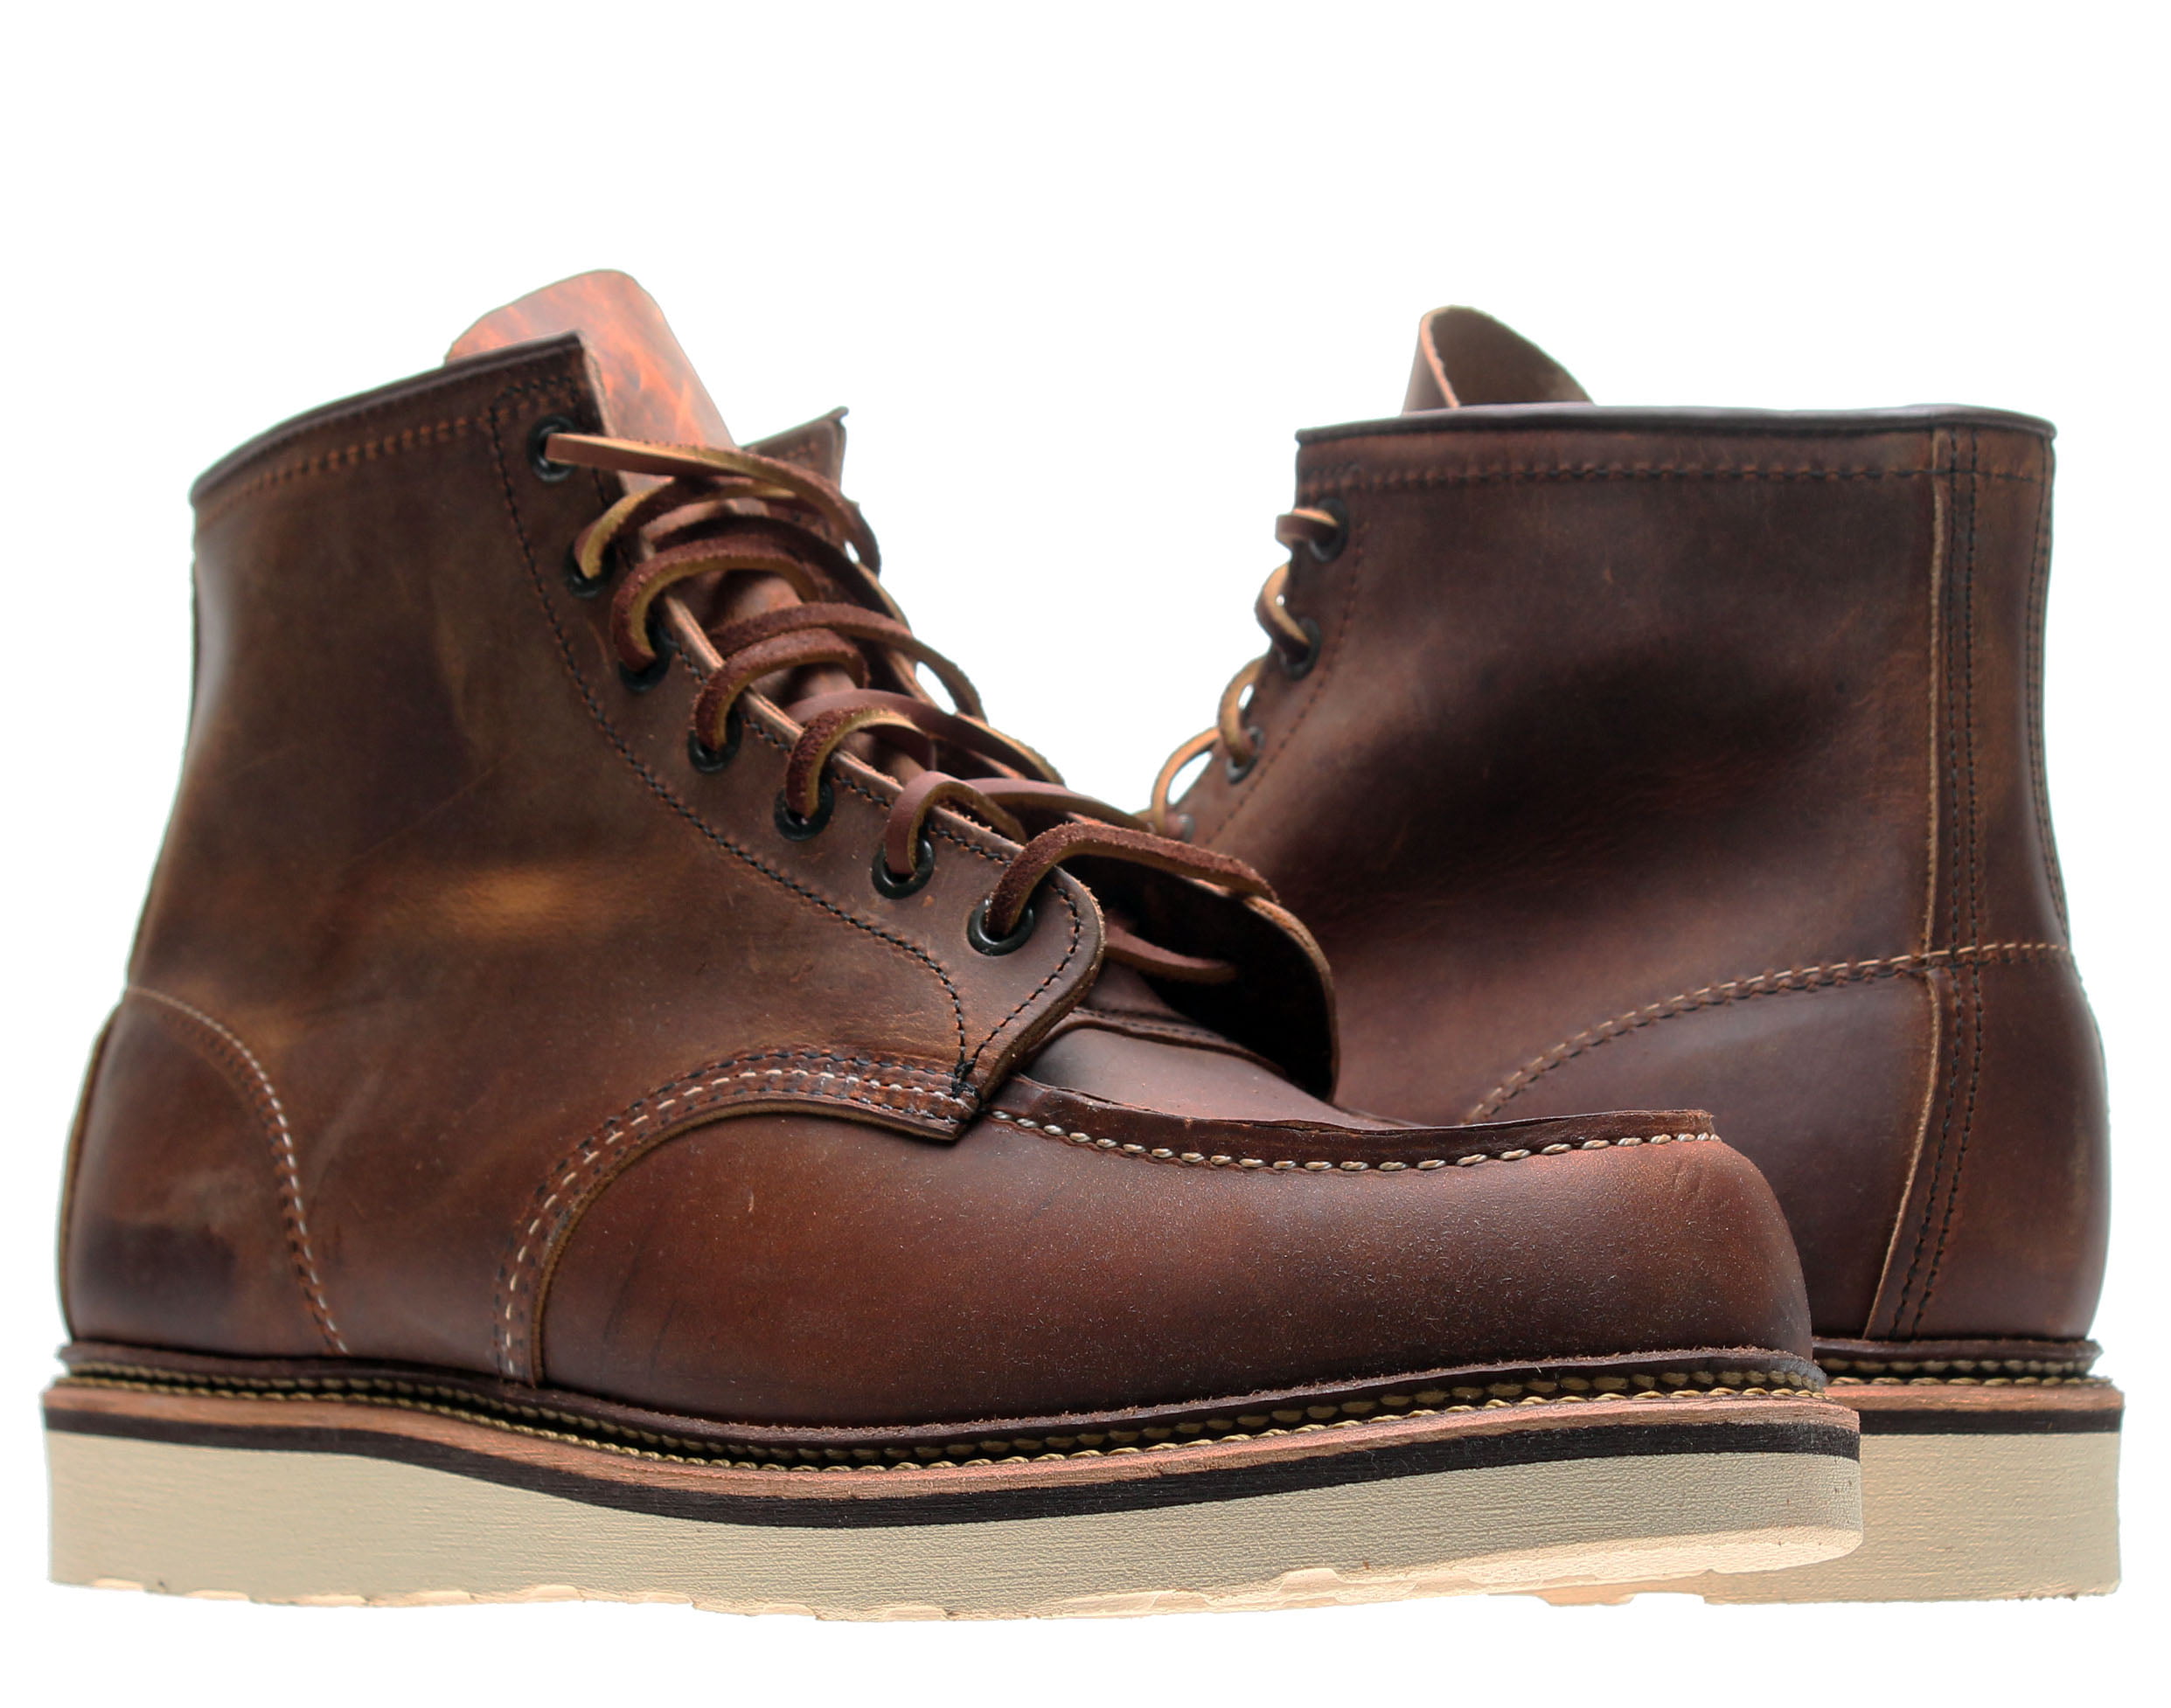 197 red wing